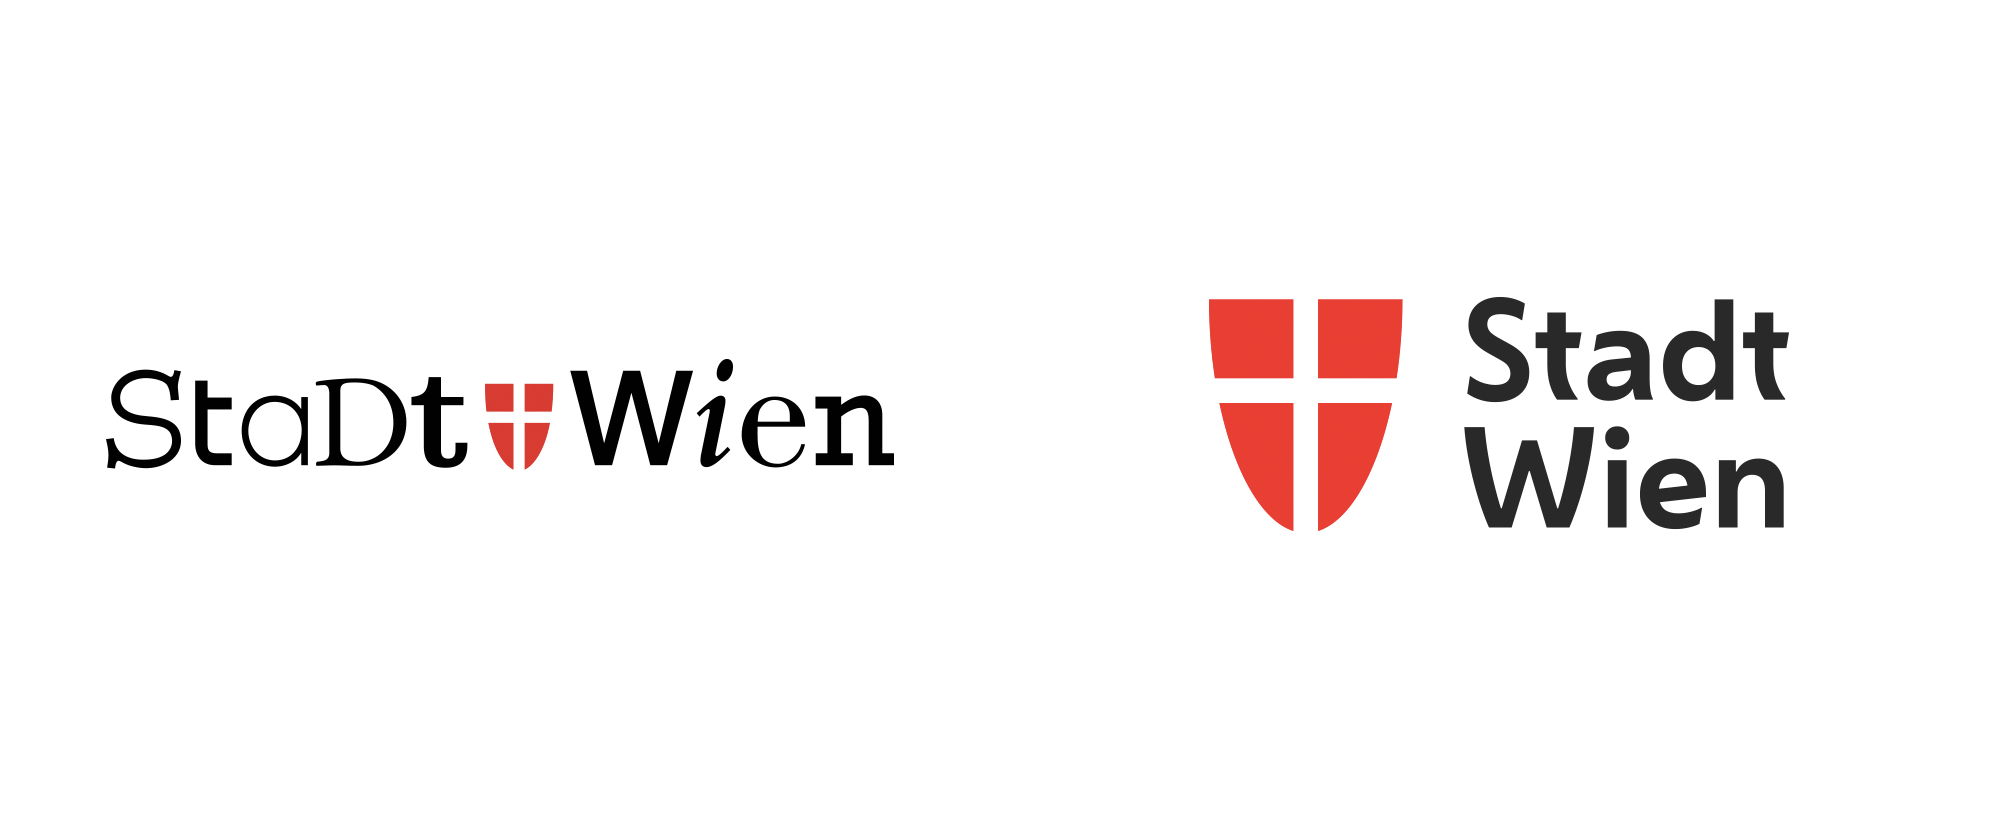 New Logo and Identity for City of Vienna by Saffron